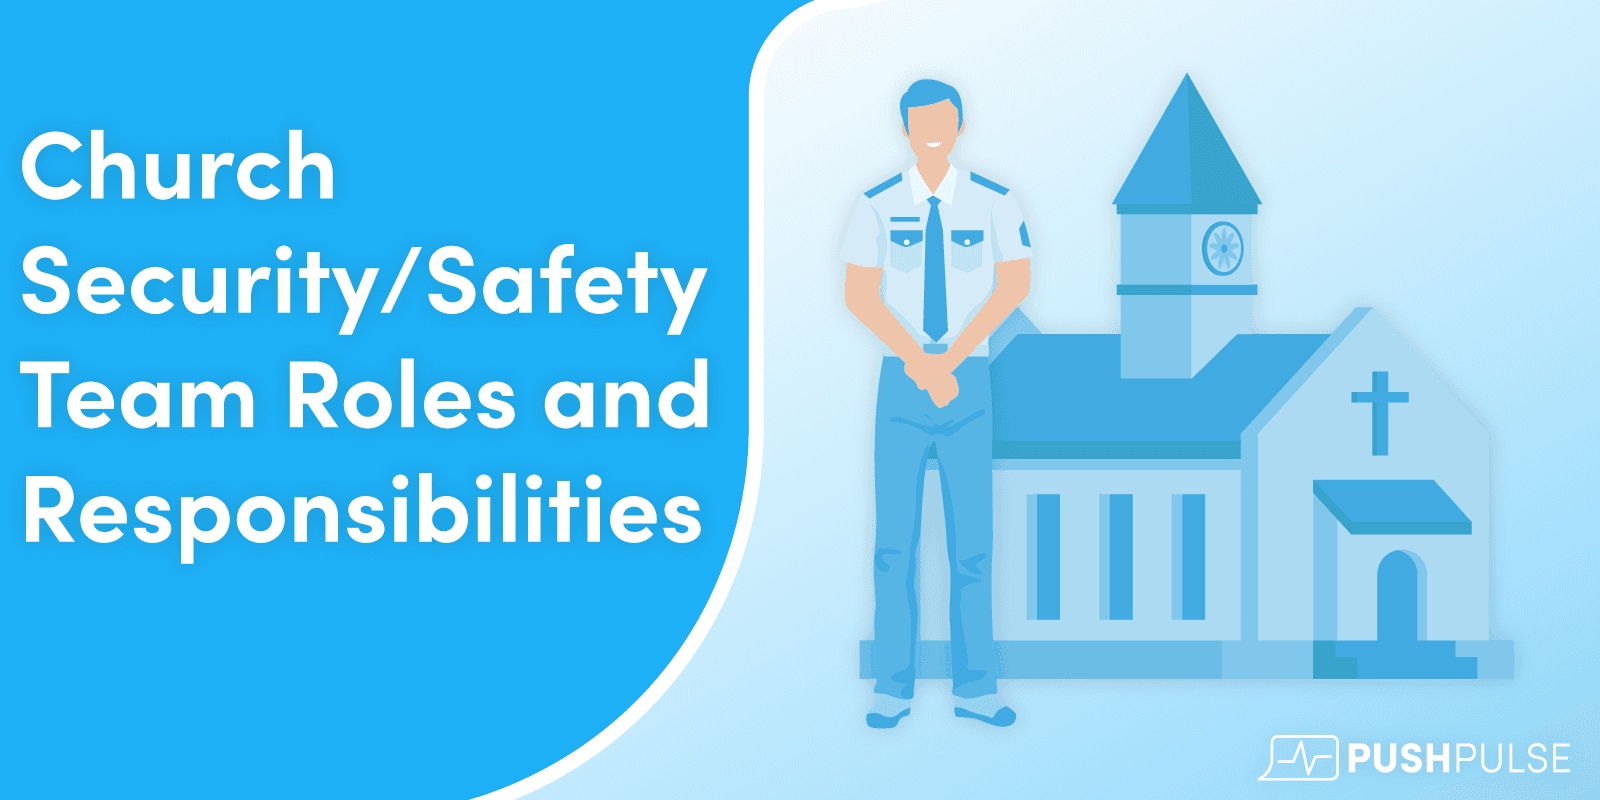 Cover Image for Church Security/Safety Team Roles and Responsibilities